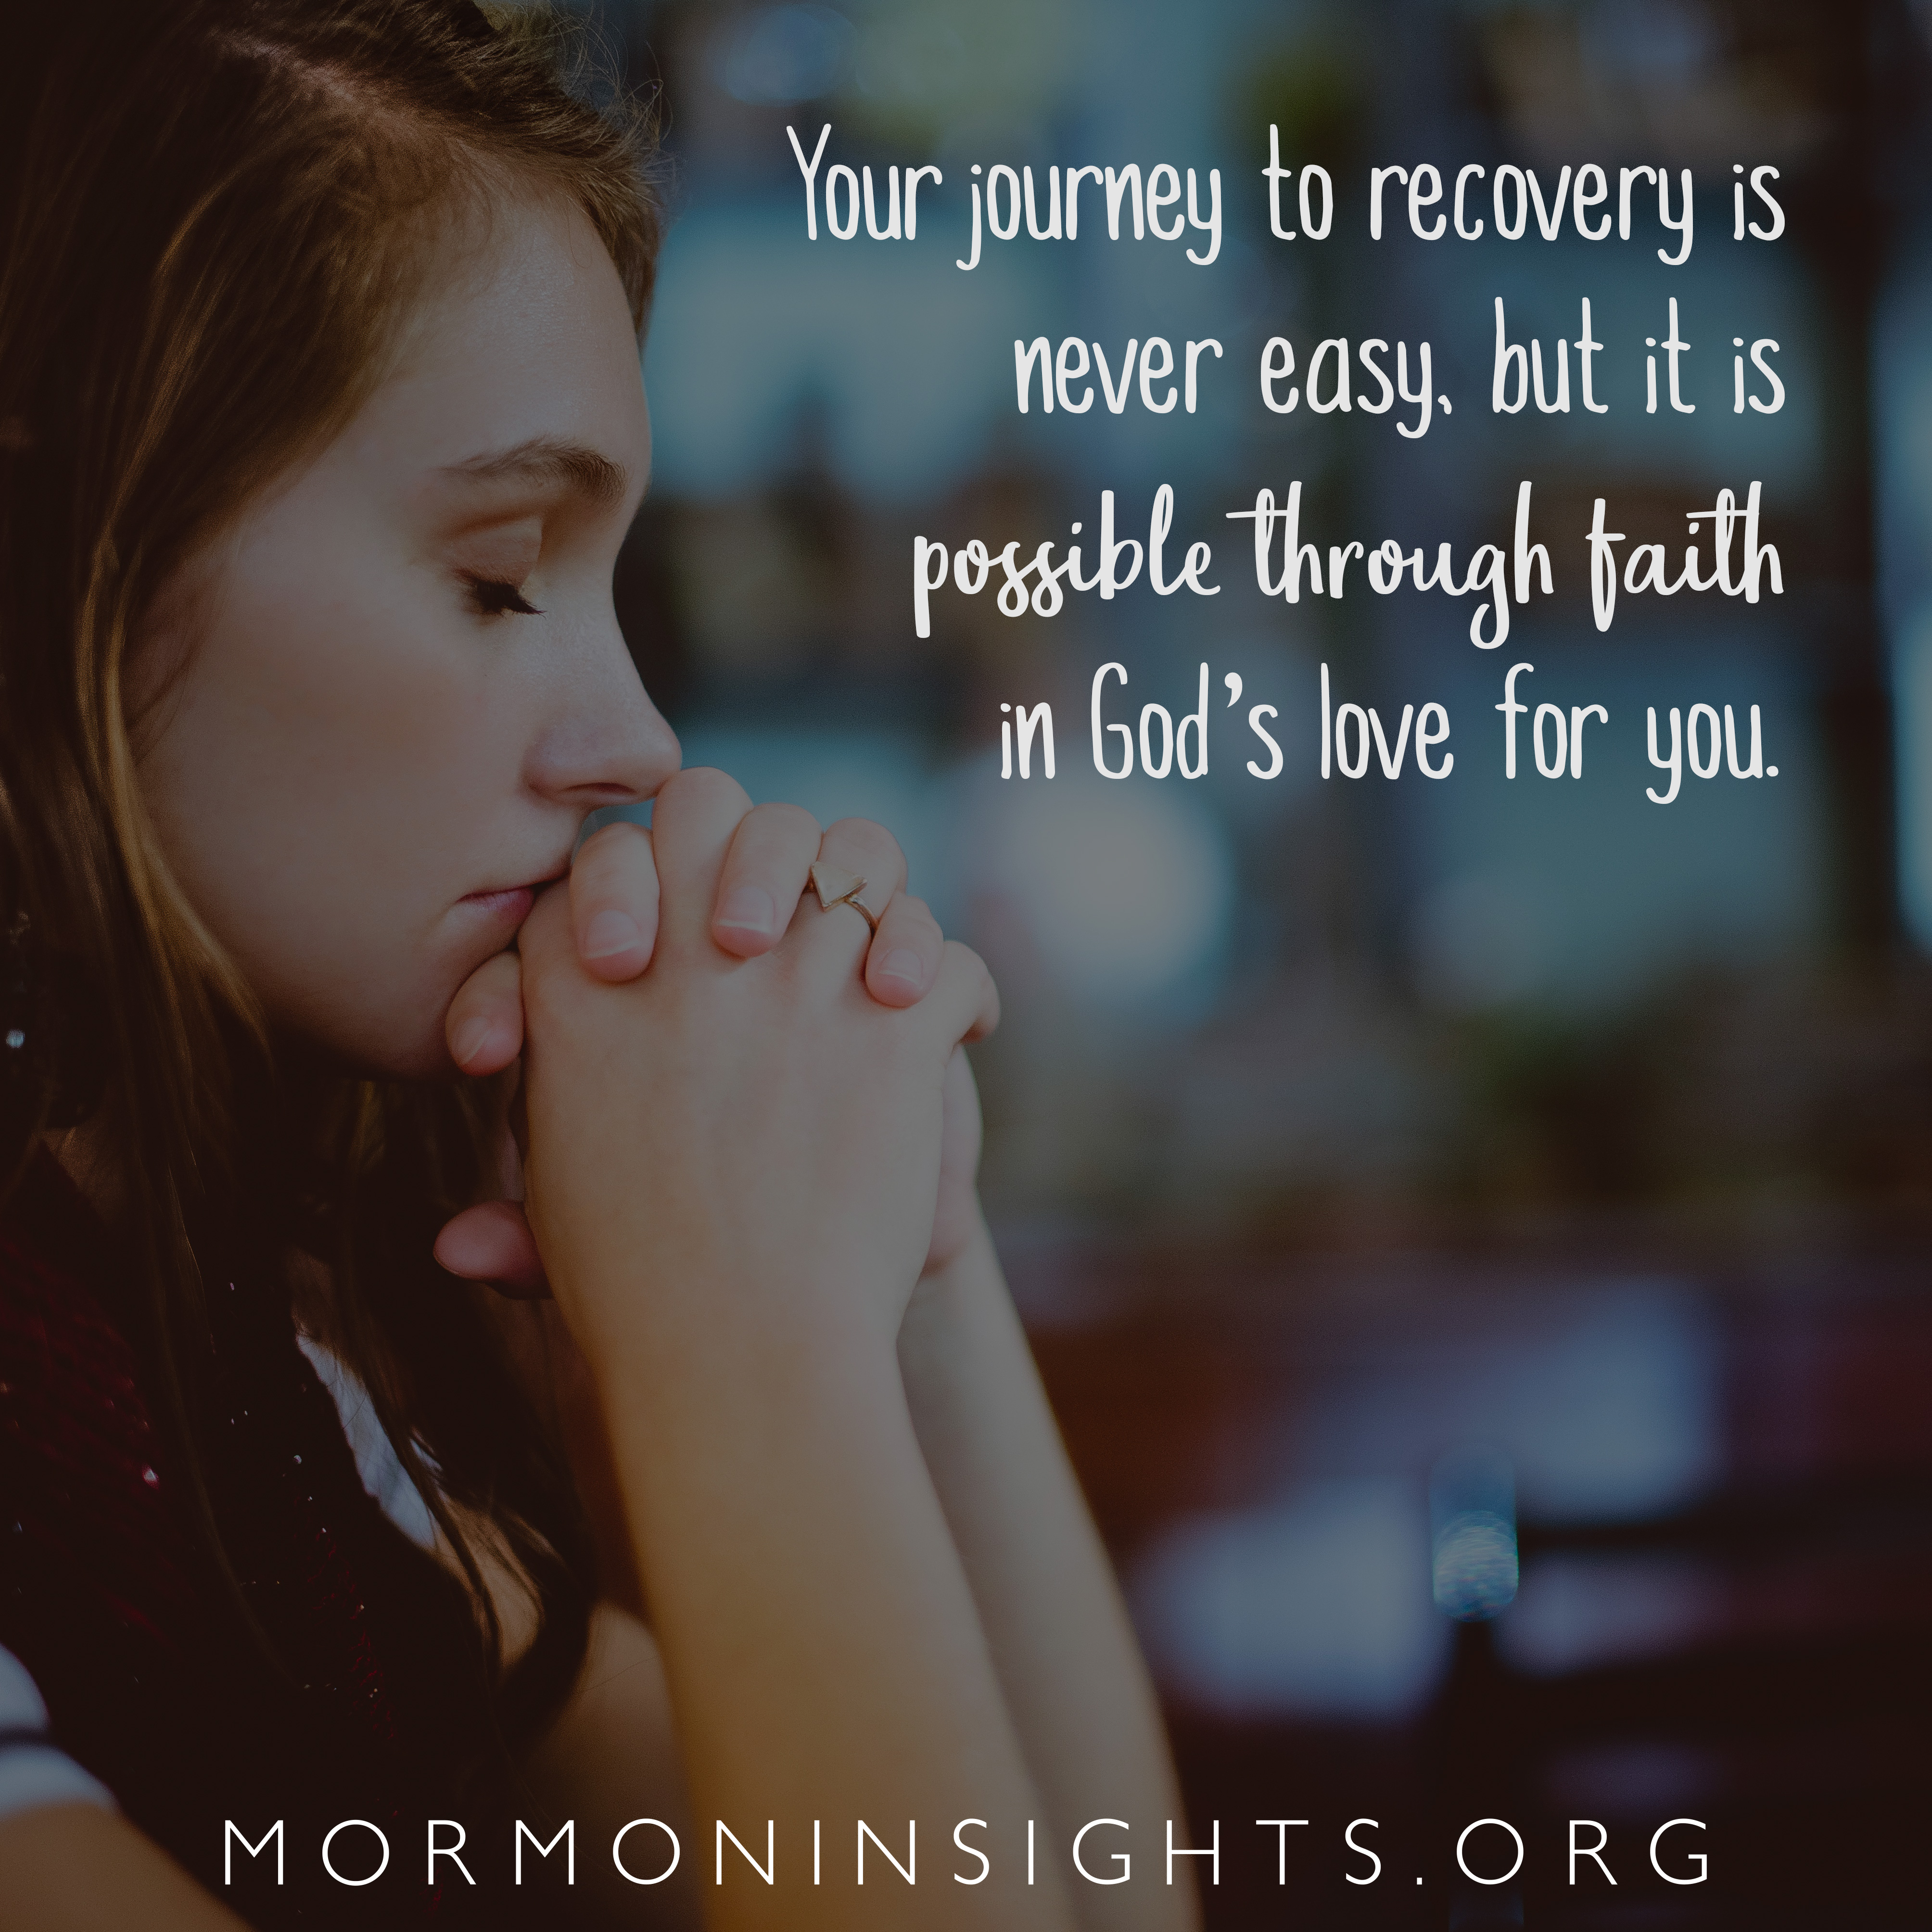 Your journey to recovery is never easy, but it is possible through faith in God's love for you.